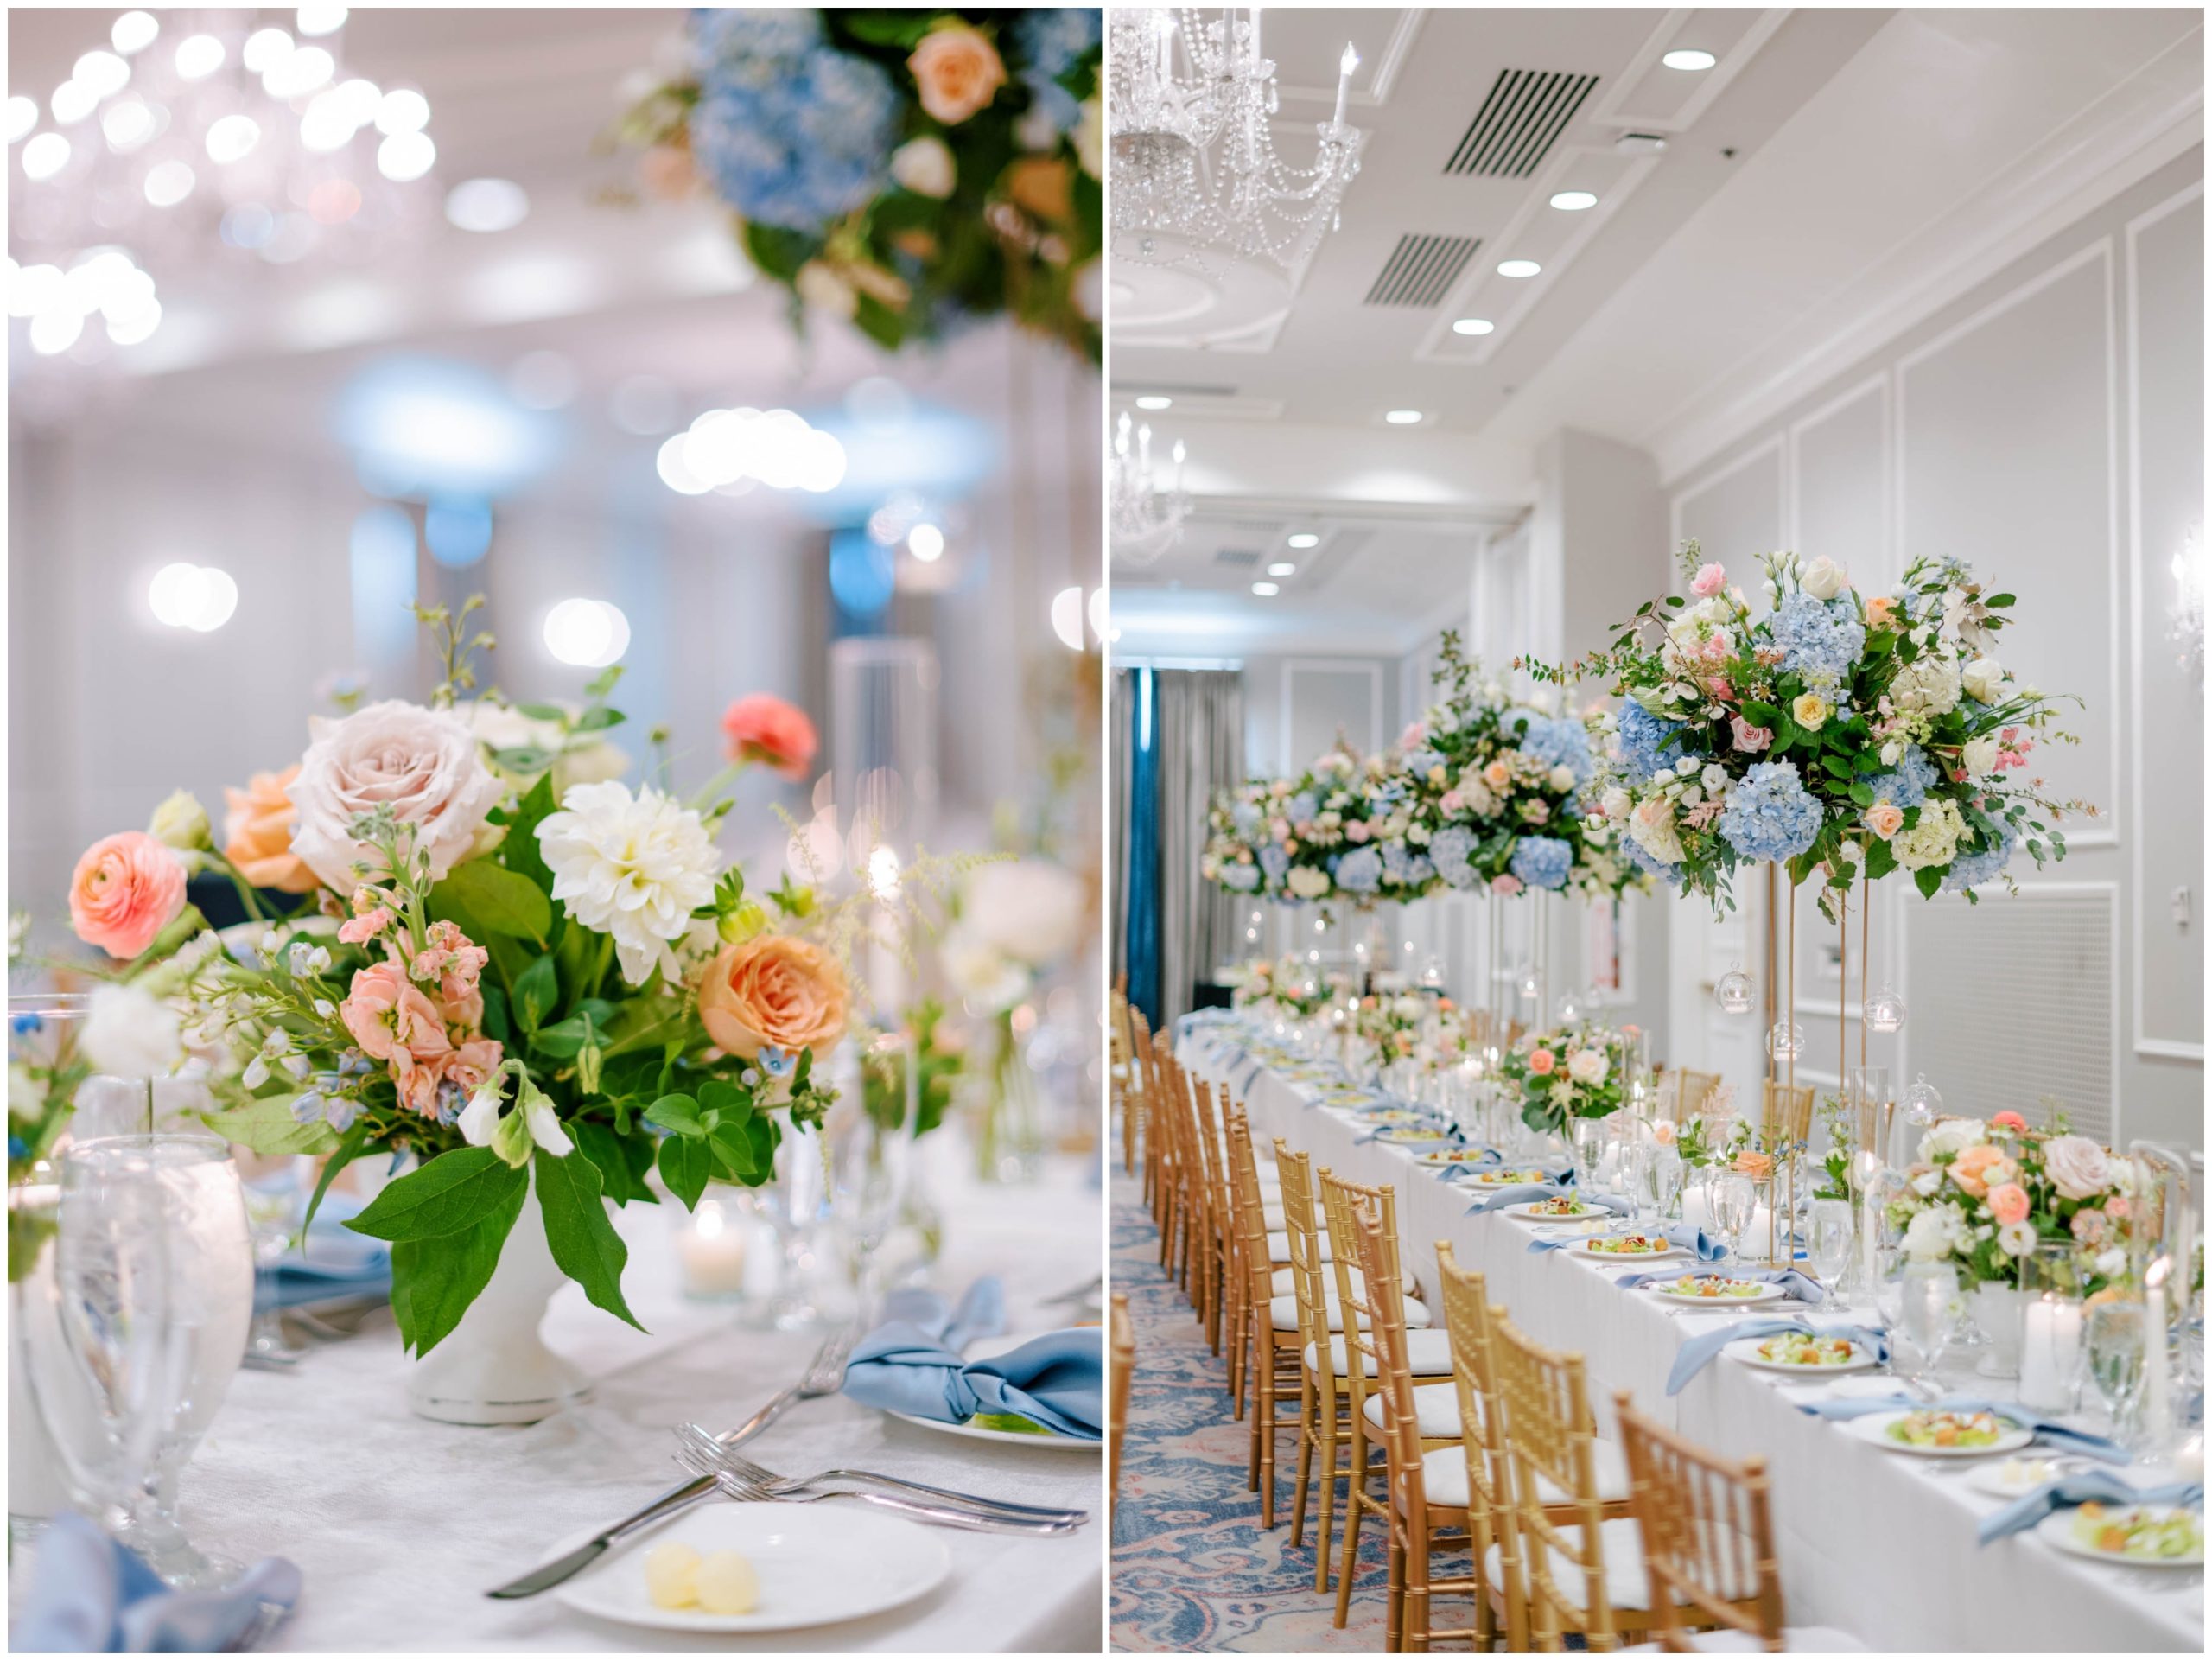 Gold Chiavari chairs, white table linens, pink and blue florals, and white pillar candles for a summer pastel wedding reception